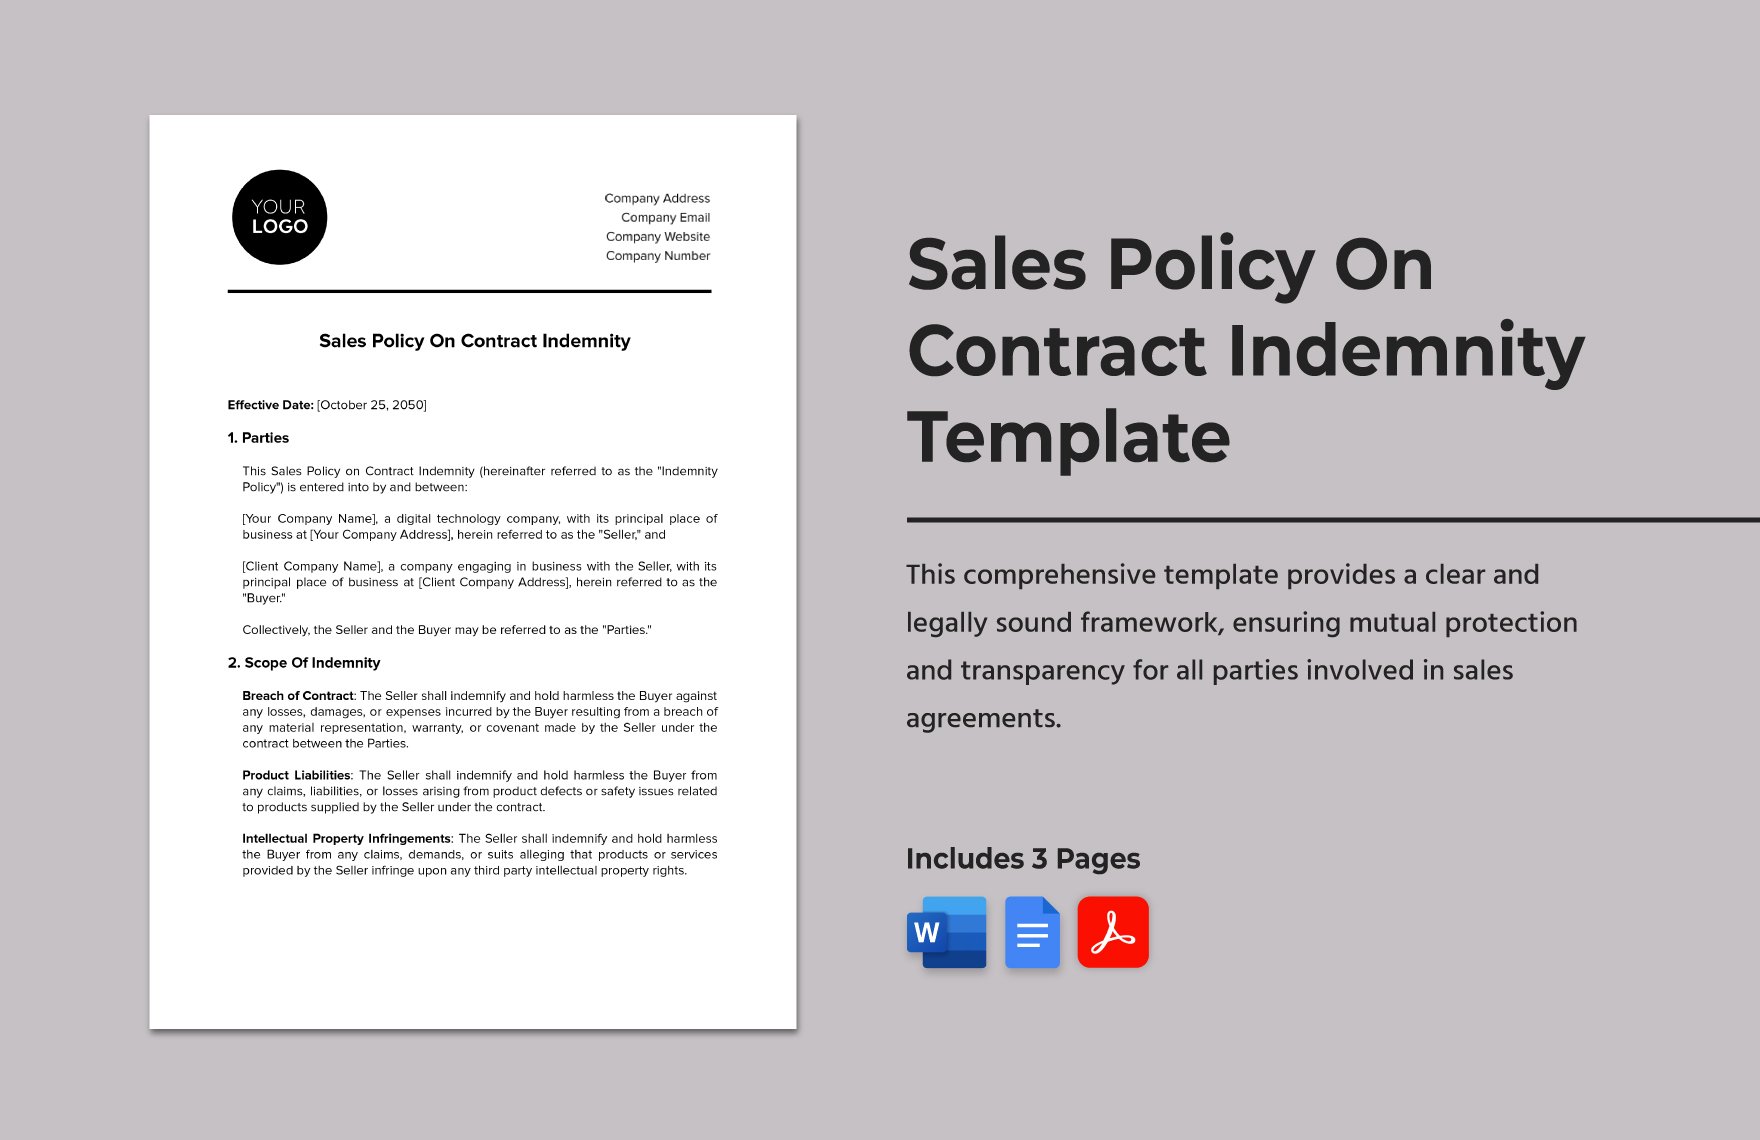 Sales Policy On Contract Indemnity Template